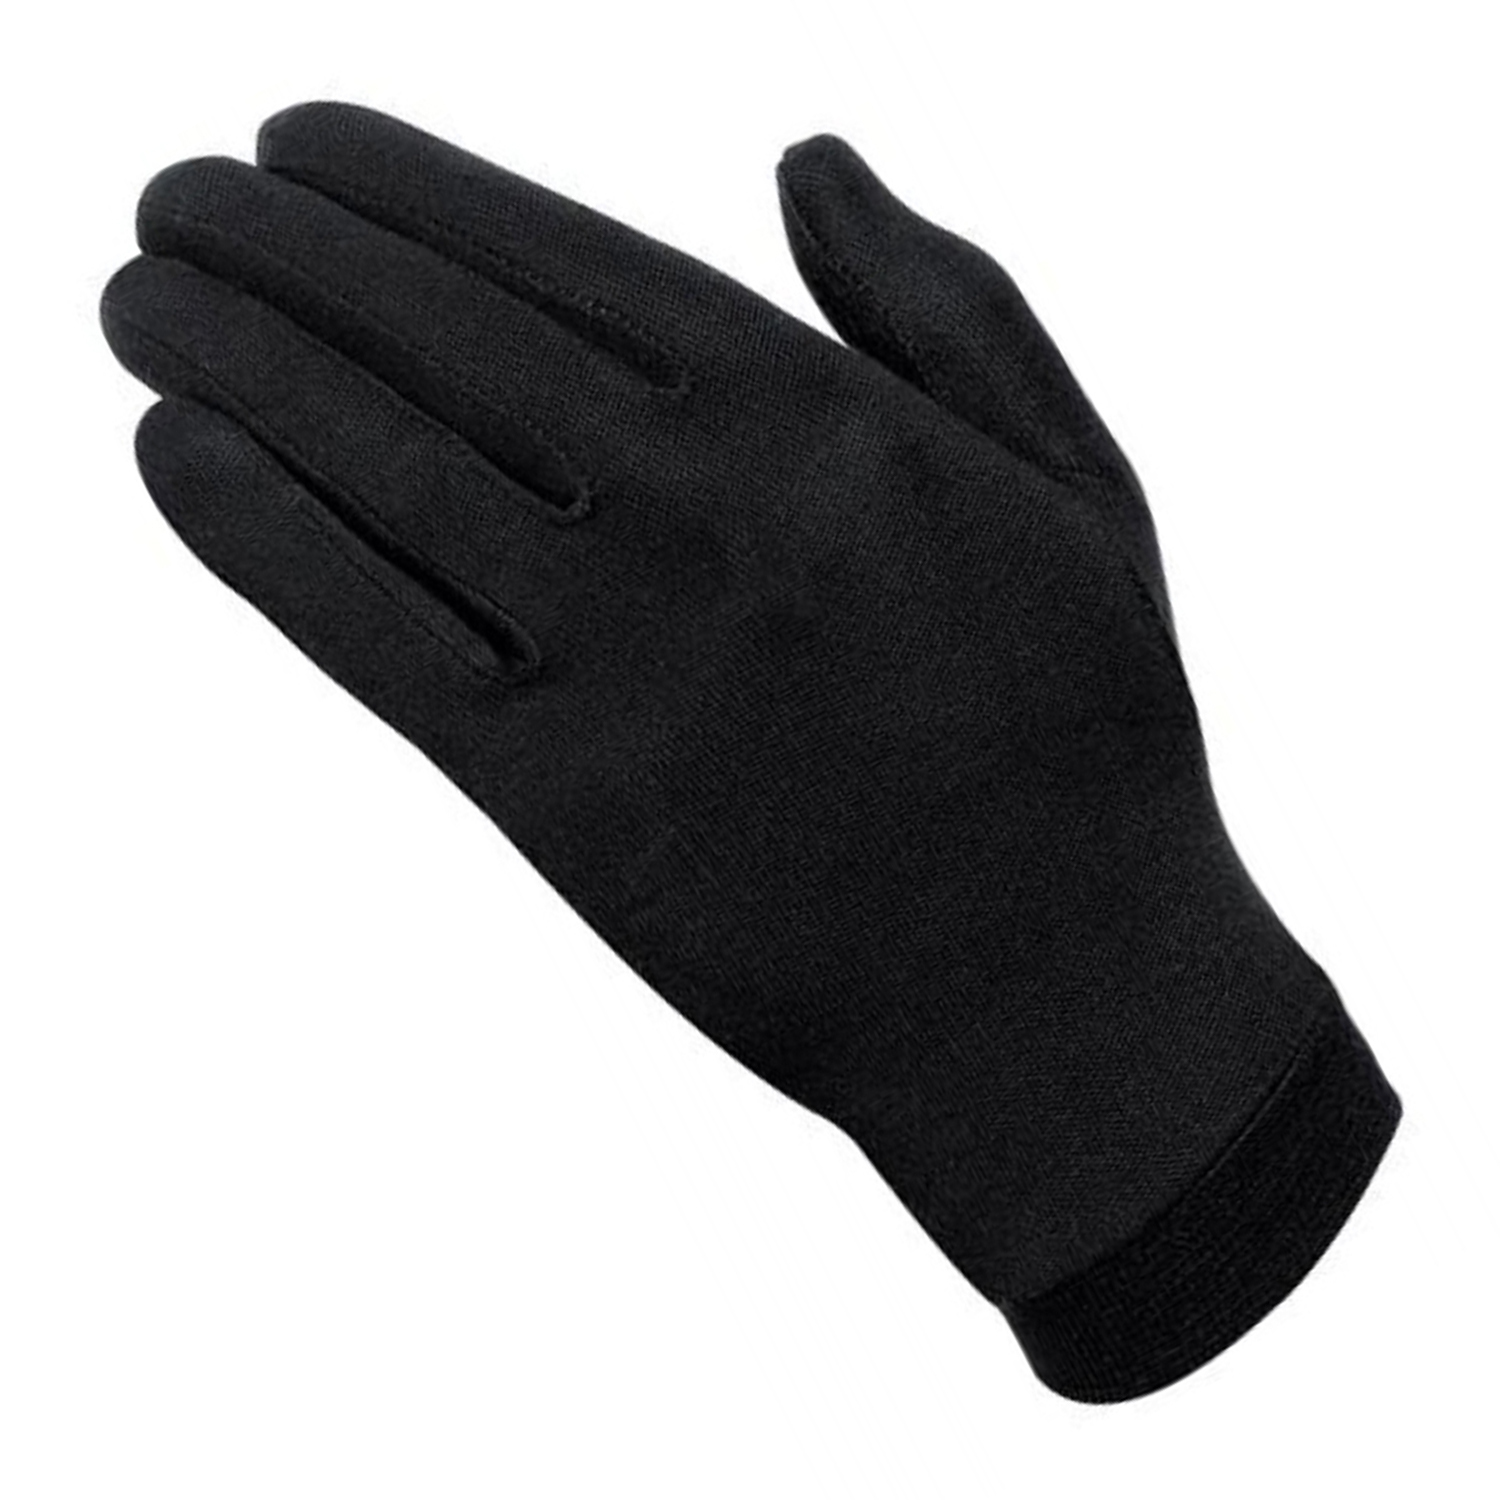 Held Underglove Silk Gloves - Available in Various Sizes